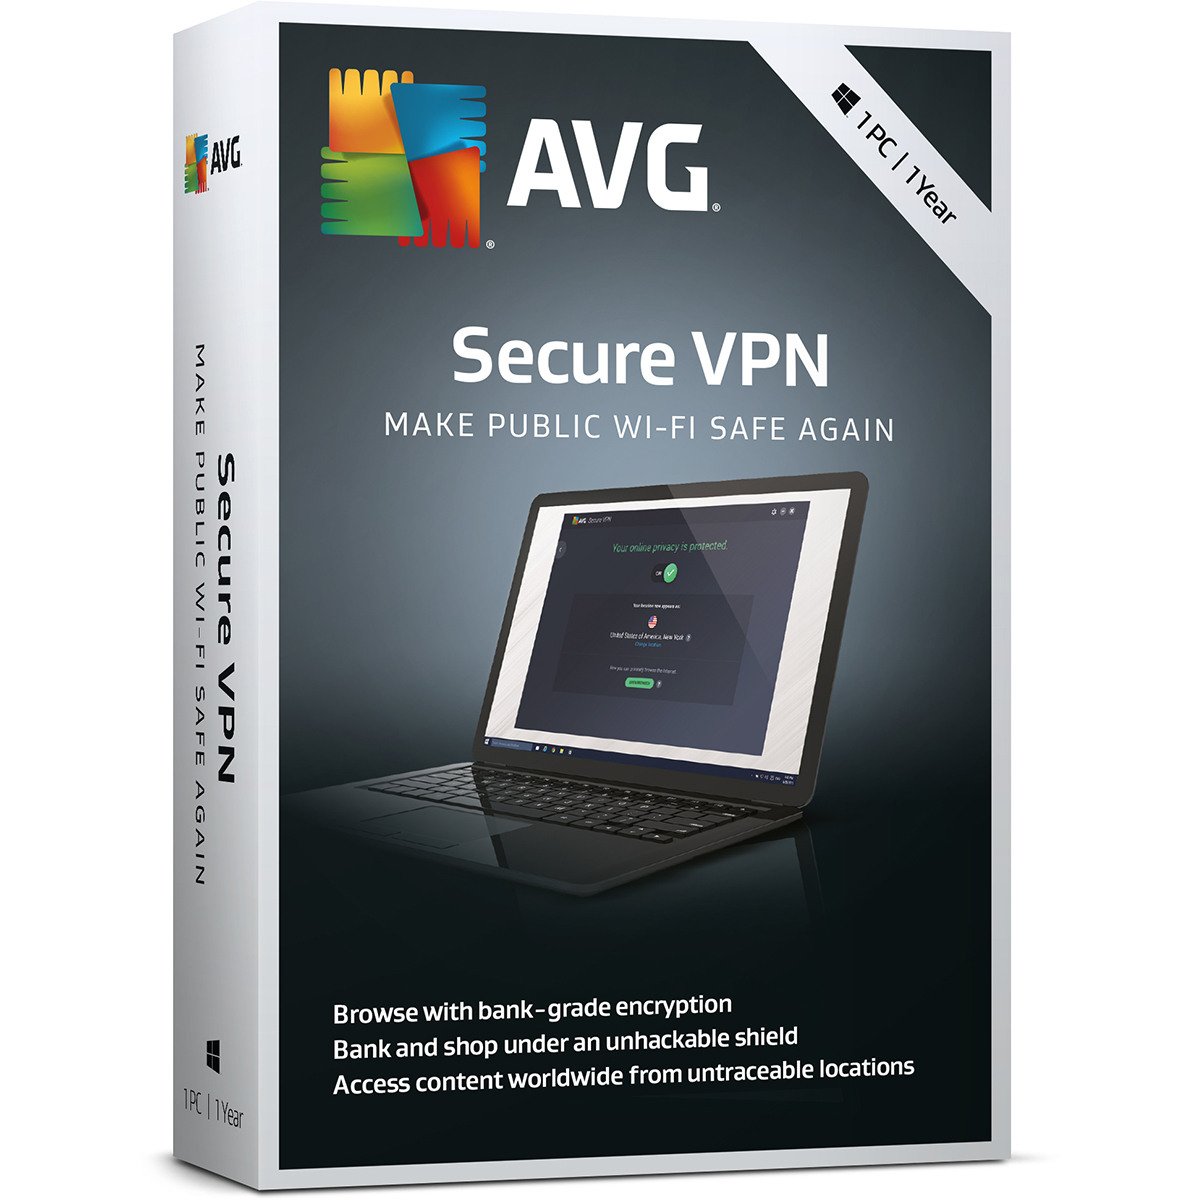 AVG Secure VPN 2 Years License ( 1 Active Connection at a time )